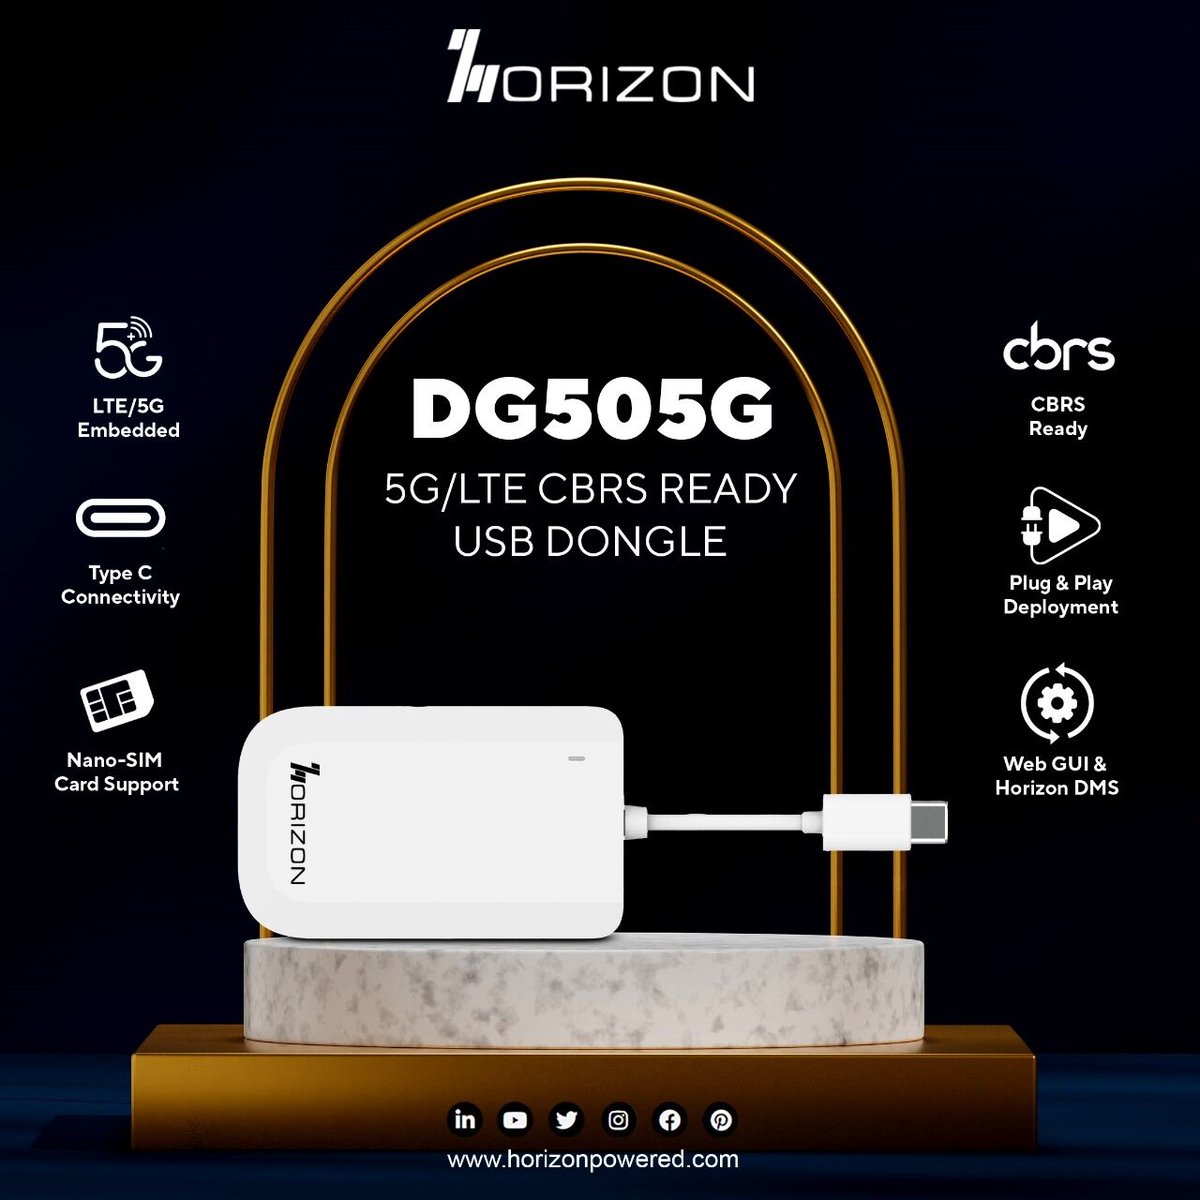 Introducing the Horizon DG505G, a versatile #TypeC #USBdongle designed for #5G/#LTE connectivity. With support for #NanoSIM cards, it's your seamless #PlugnPlay solution for #HighSpeedIinternet access. 
horizonpowered.com/devices/usb-do…
 #Connectivity #CBRS #HorizonPowered #StayConnected